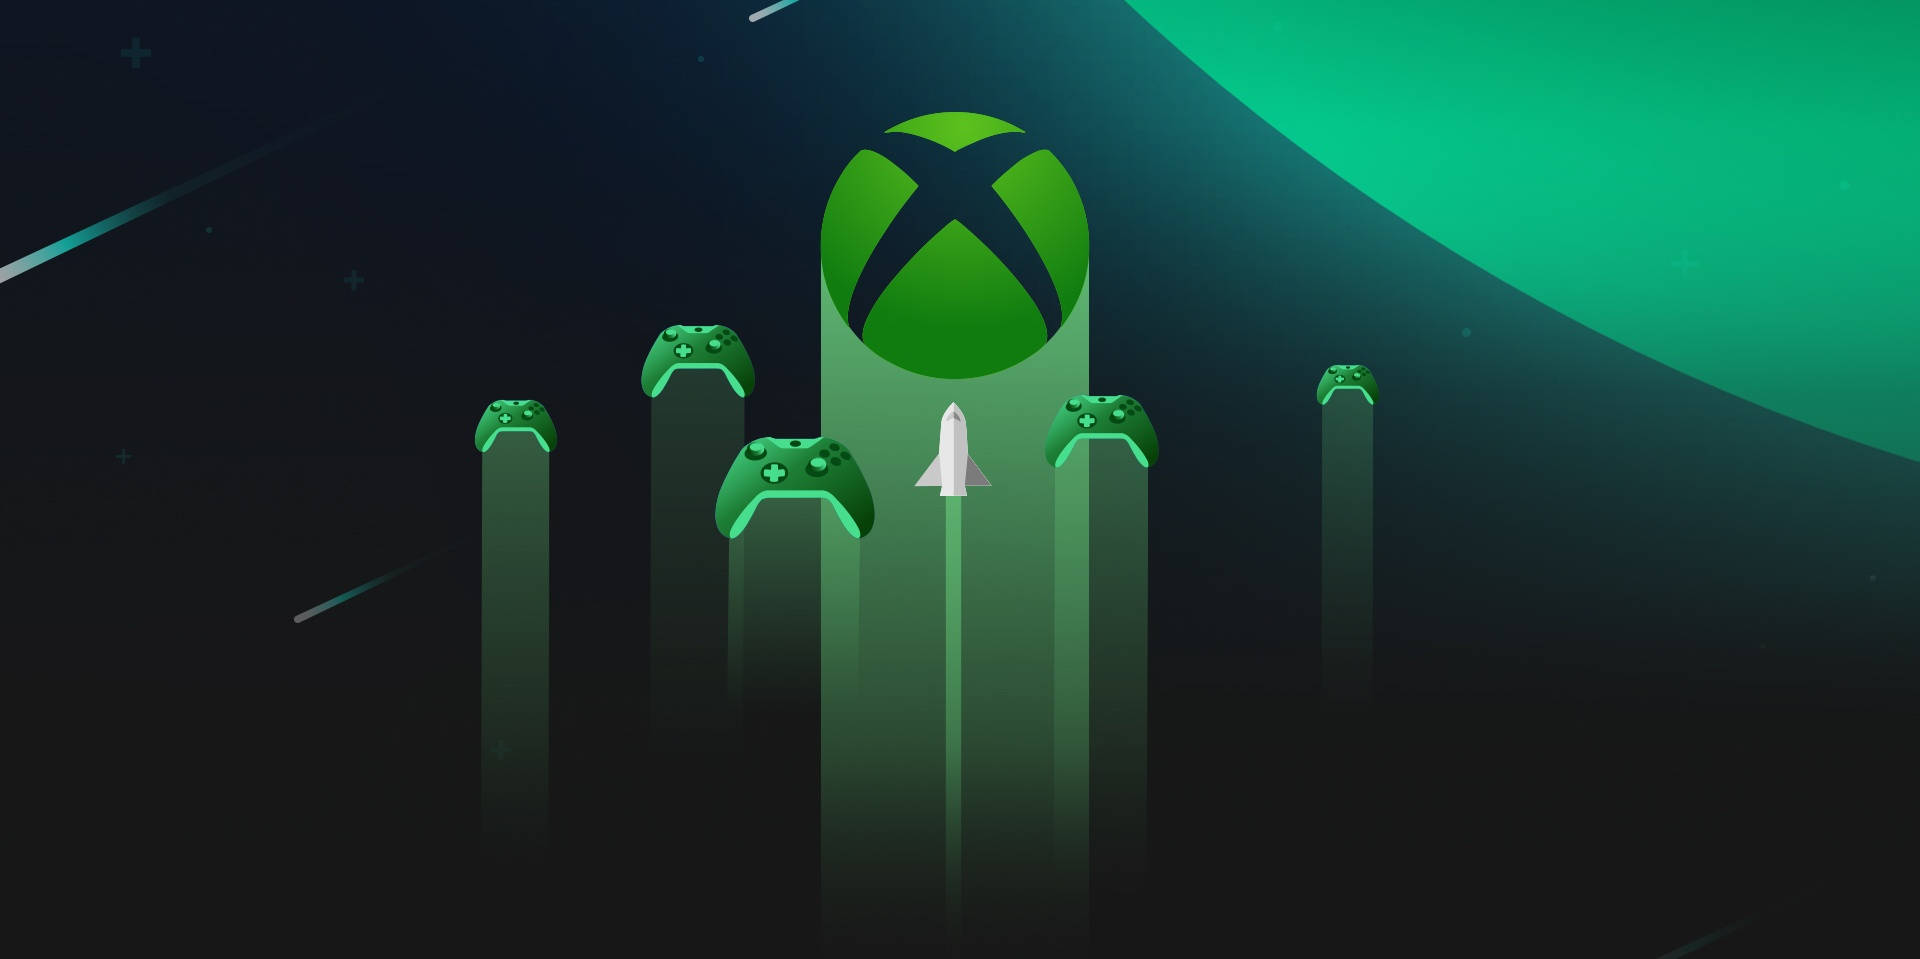 100+] Xbox Series X Wallpapers | Wallpapers.com